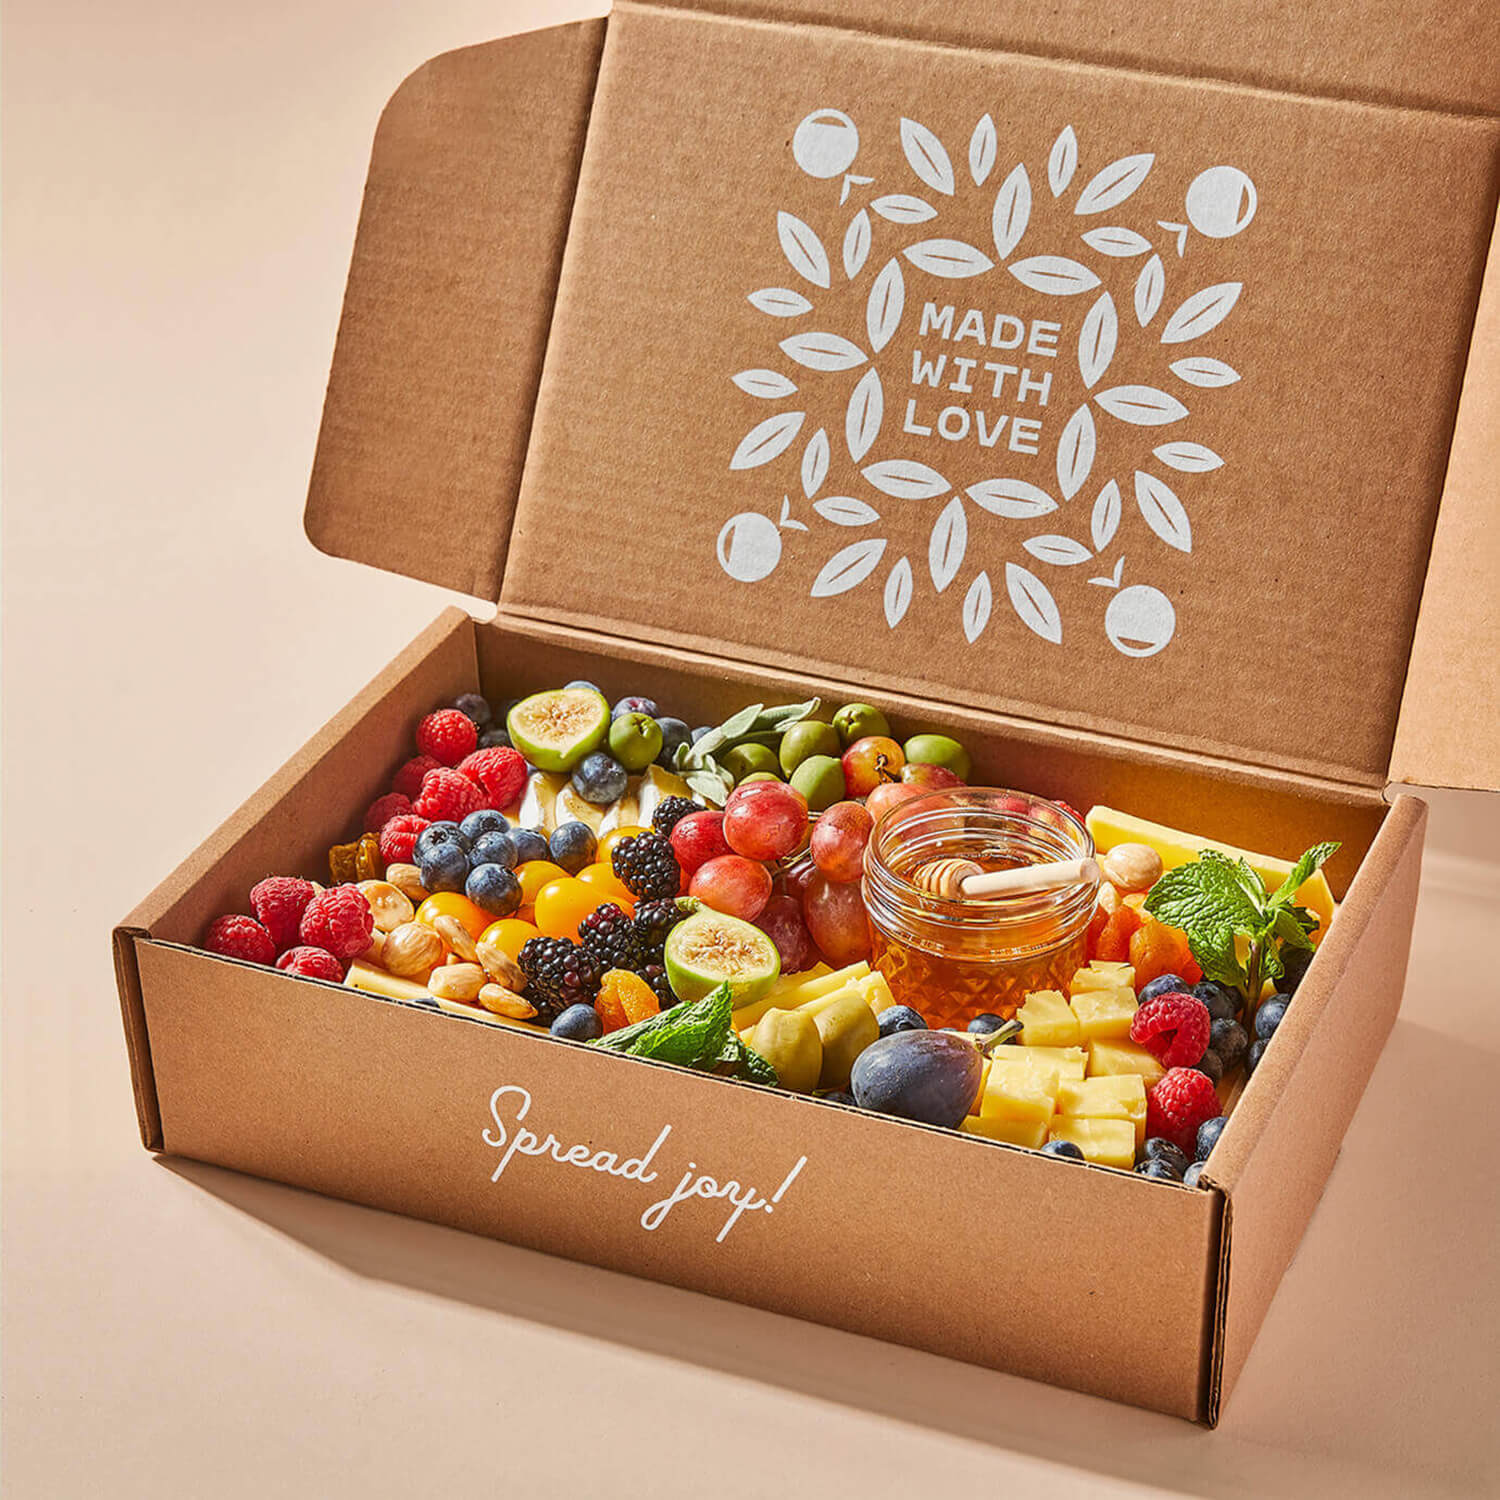 Angled view of an open medium Grazy box containing cheeses and fruits